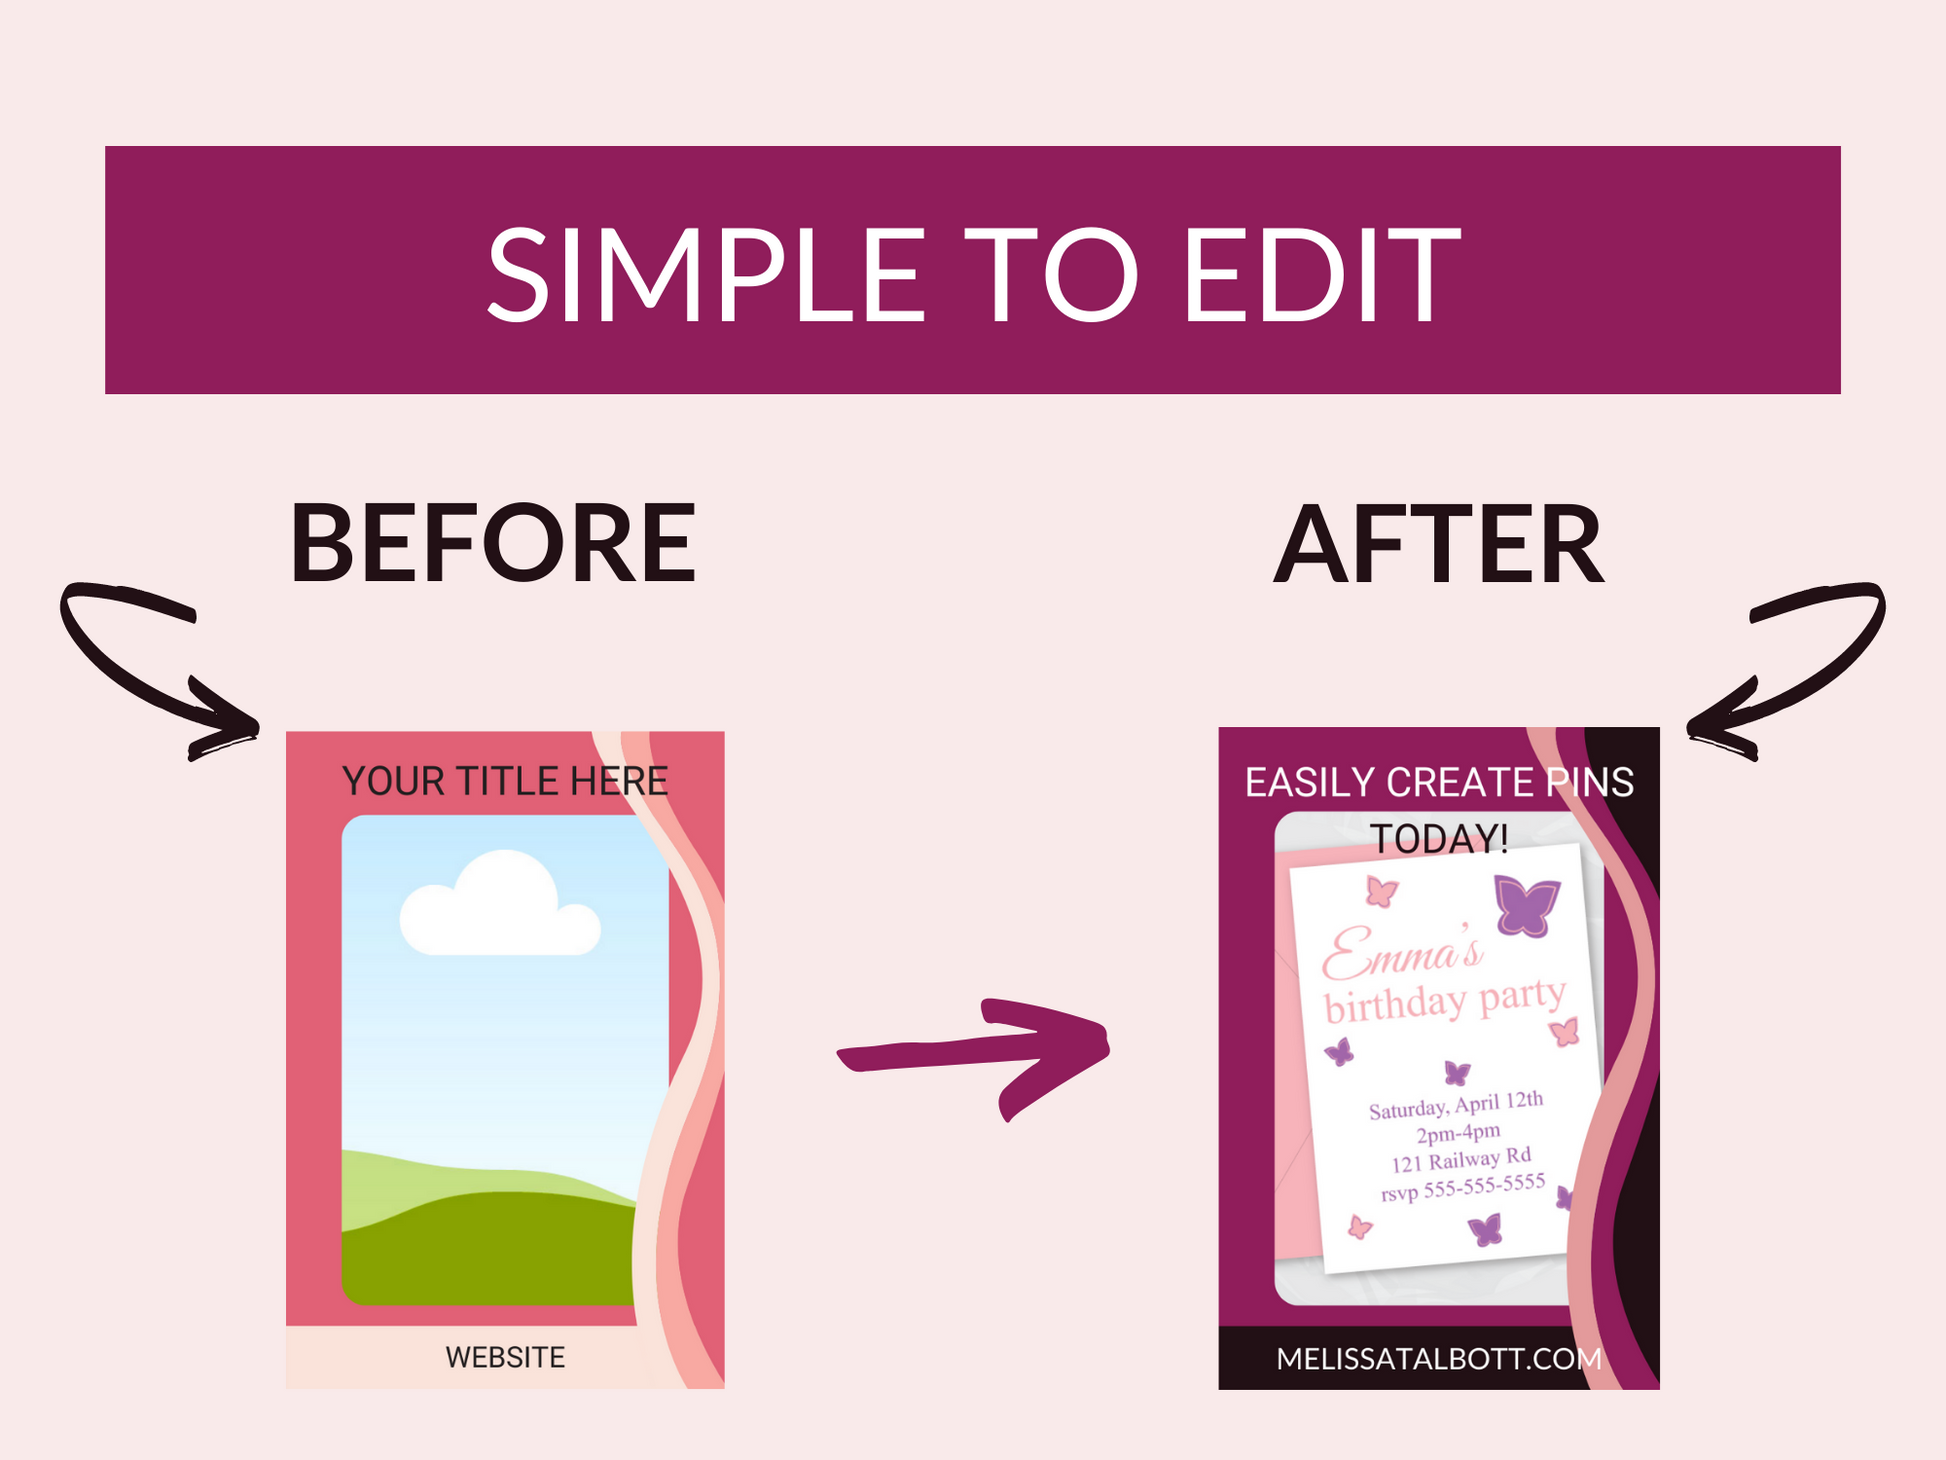 before and after editing a pinterest pin template in canva - Melissa Talbott